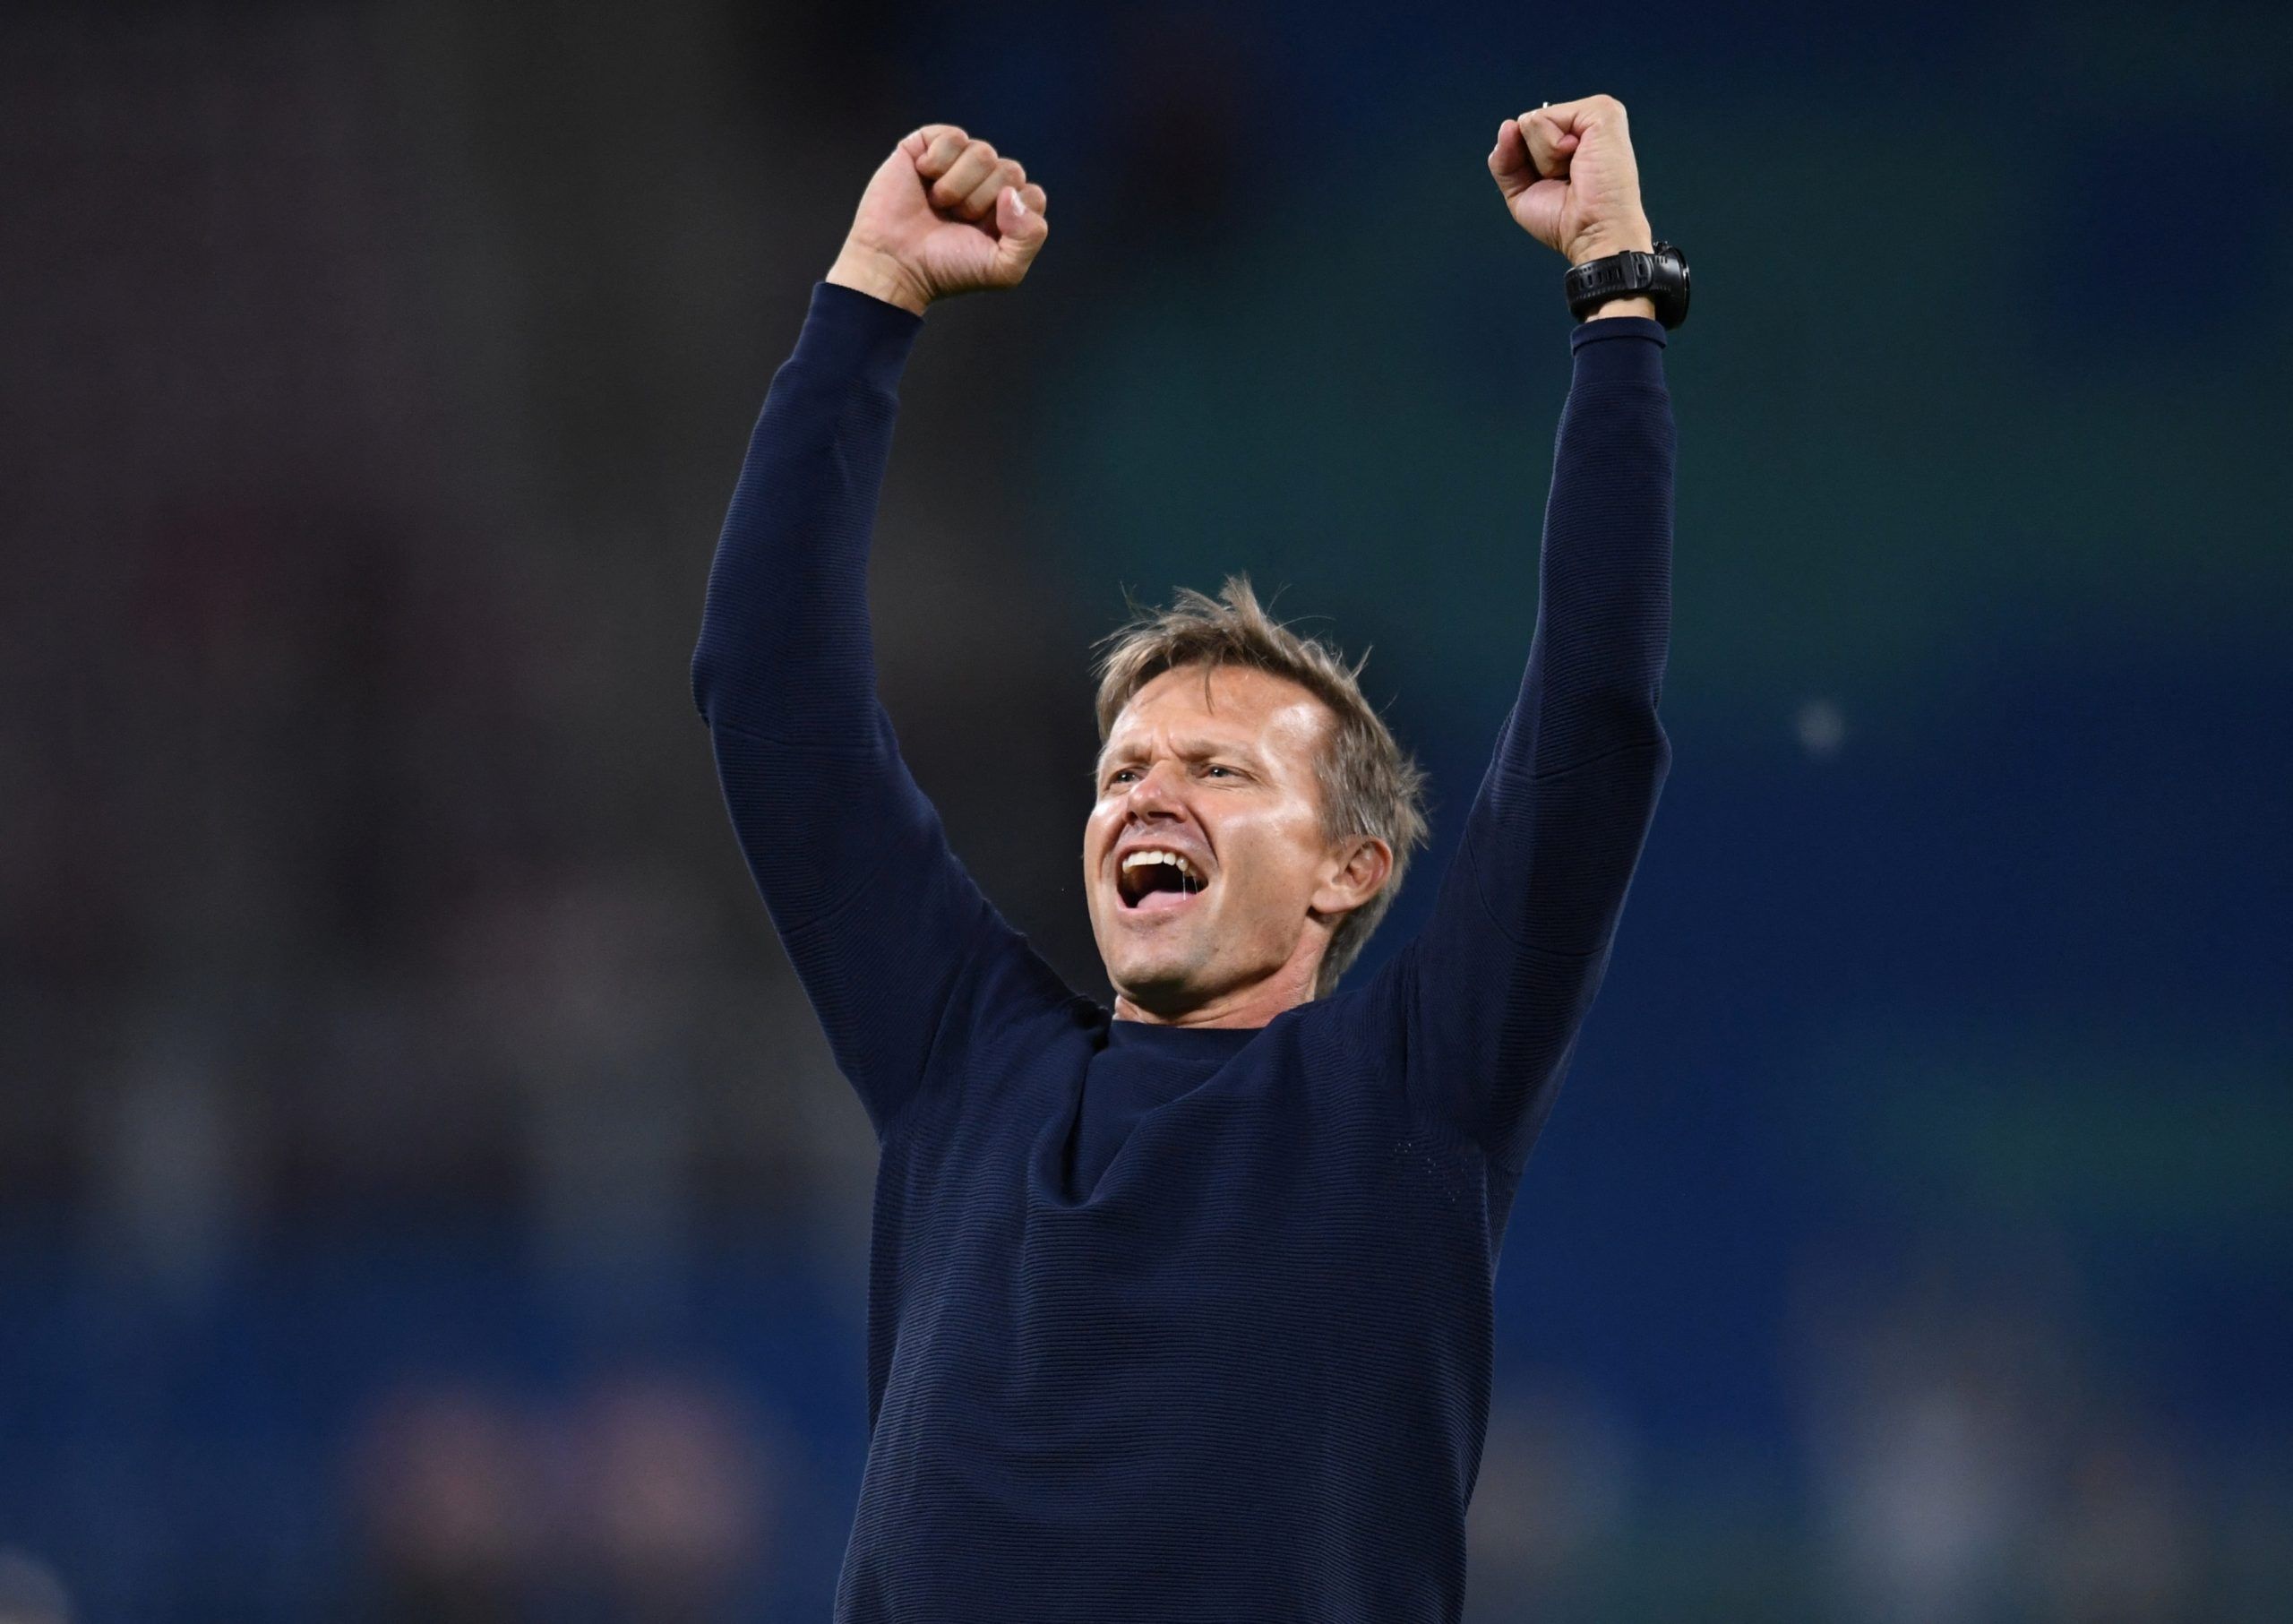 FILE PHOTO: Soccer Football - Bundesliga - RB Leipzig v VfB Stuttgart - Red Bull Arena, Leipzig, Germany - August 20, 2021. RB Leipzig coach Jesse Marsch celebrates after the match REUTERS/Annegret Hilse/File Photo DFL regulations prohibit any use of photographs as image sequences and/or quasi-video.